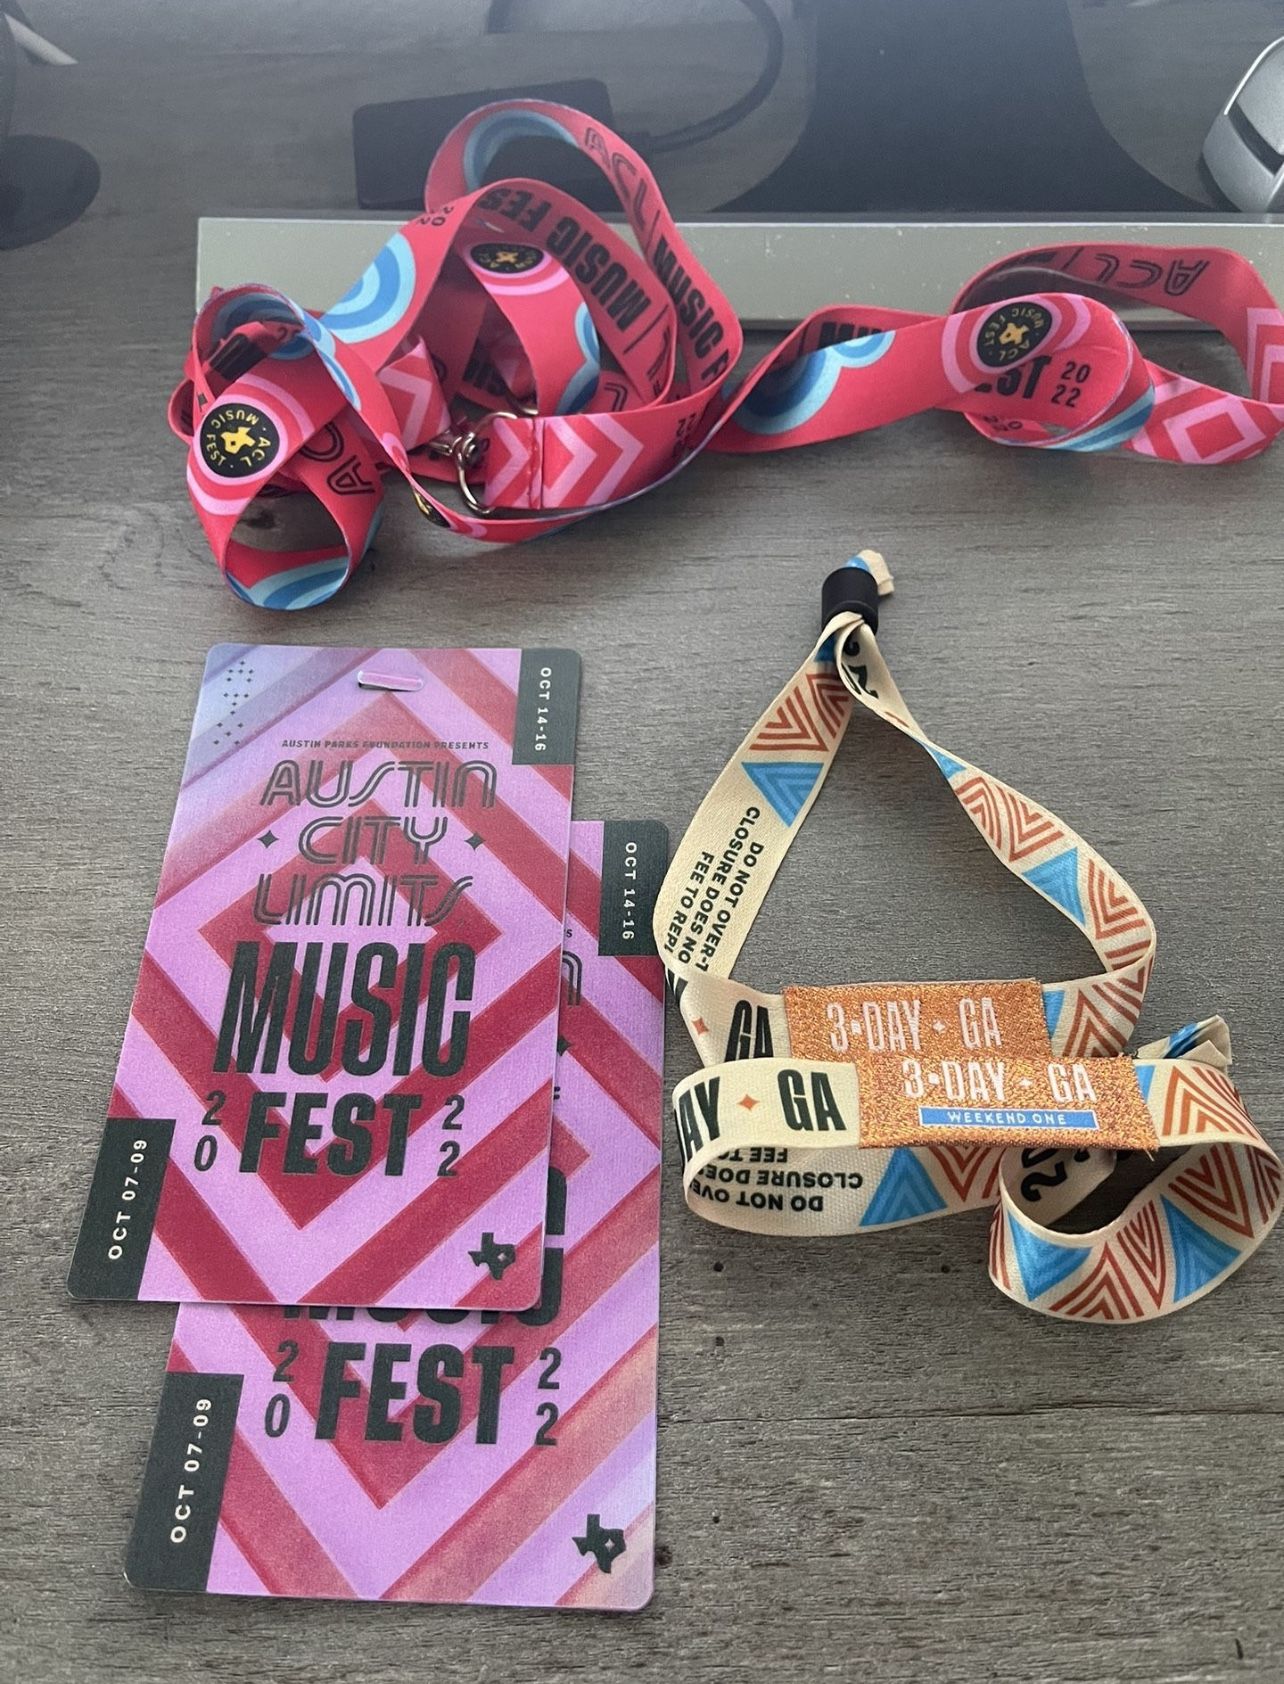 Weekend One ACL 3 Day Pass 2 Tickets